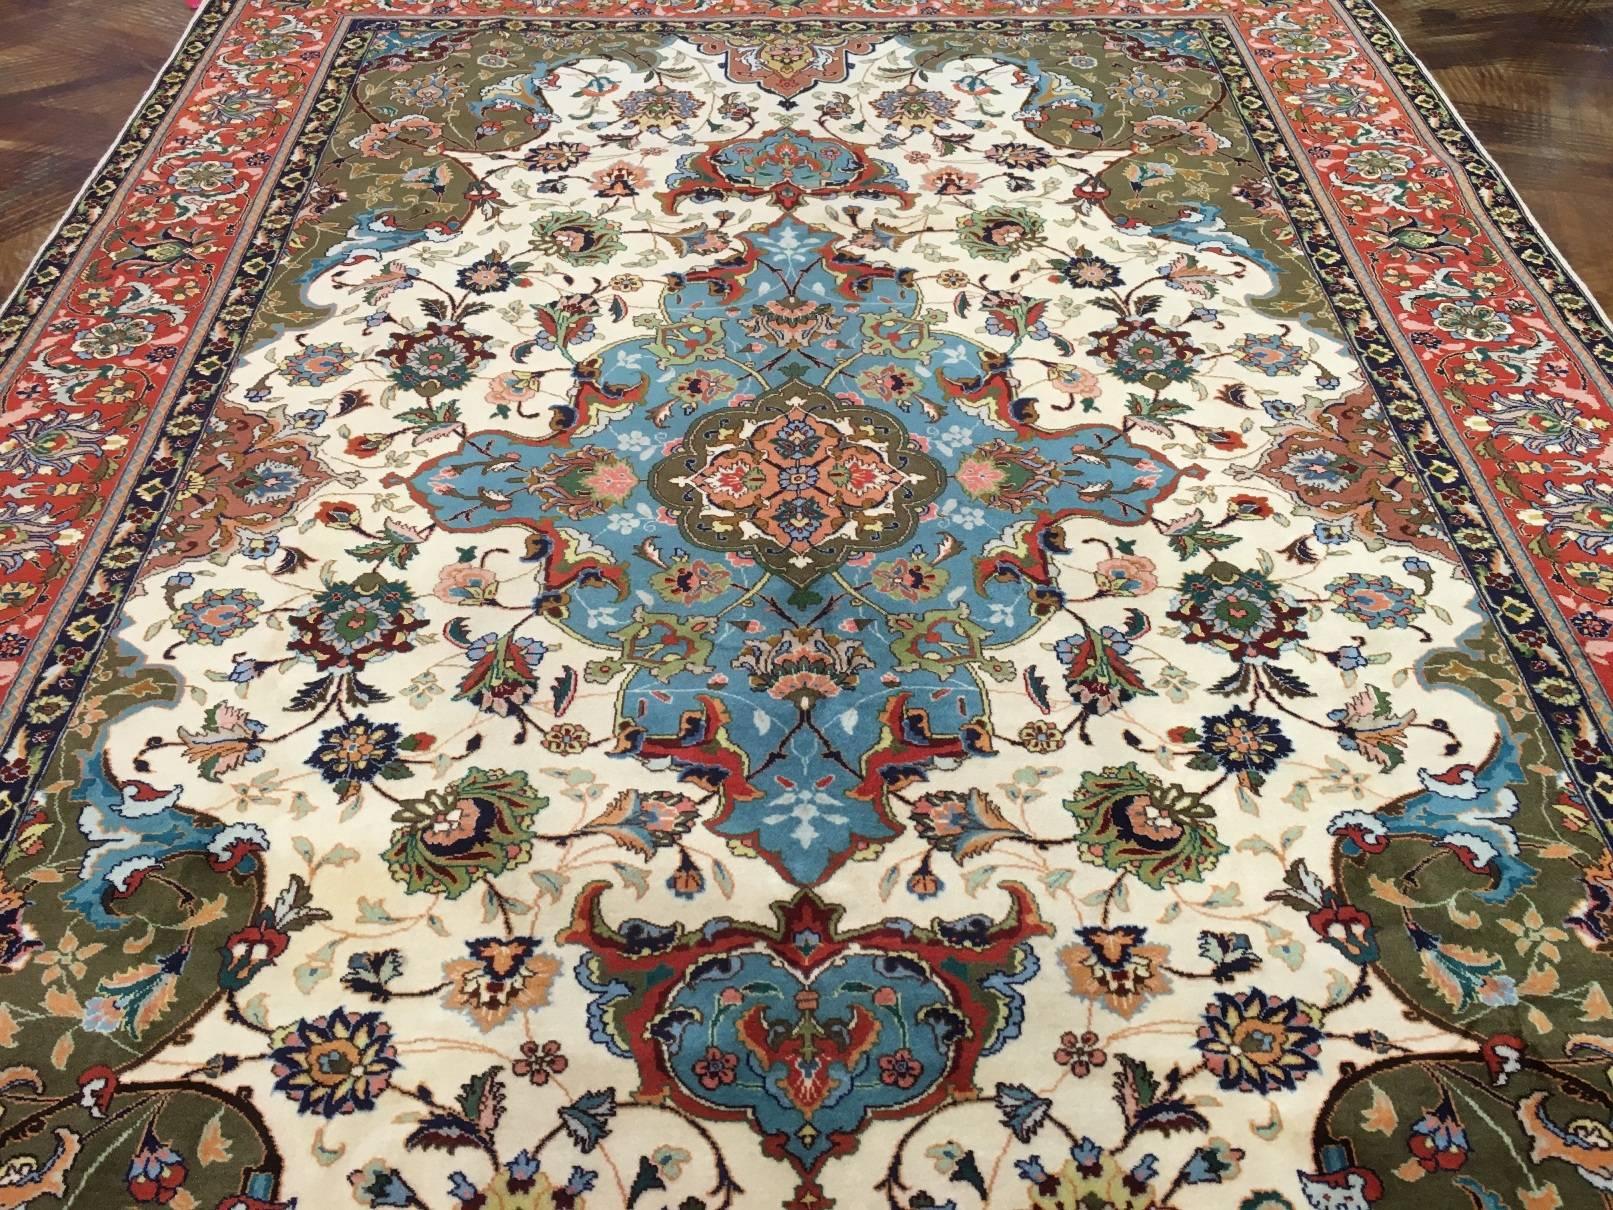 This is a Persian Tabriz handwoven circa 1930-1940 by master weavers in Iran in the city of Tabriz. The weaver has put attention to colors and detail thus making this a very tight weave. This rug is what is better know as a 50 Raj weave. The